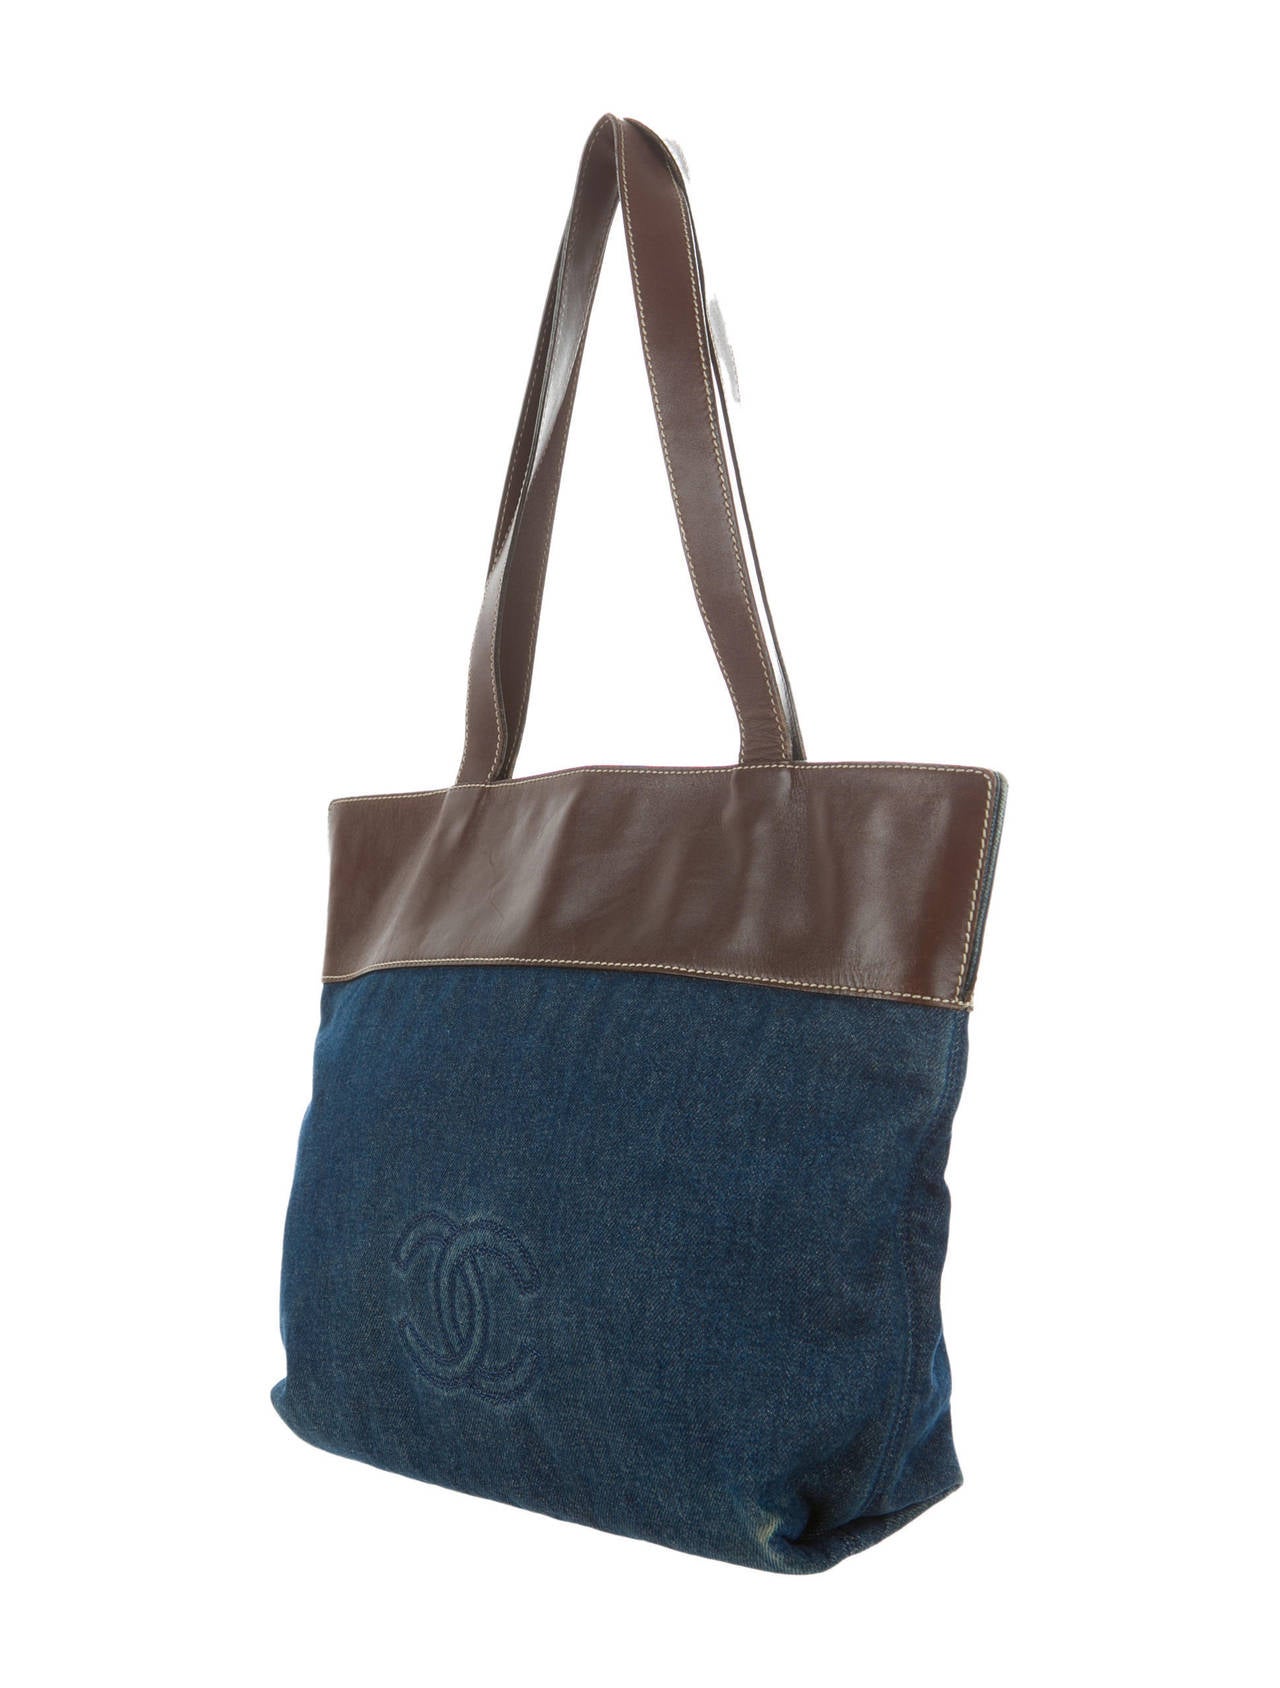 Chanel blue denim tote with stitched logo at front face, white contrast stitching throughout, brown leather top with dual leather handles, two interior zip pockets and top magnetic snap closure. Serial number reads 611505. 

Shoulder strap drop